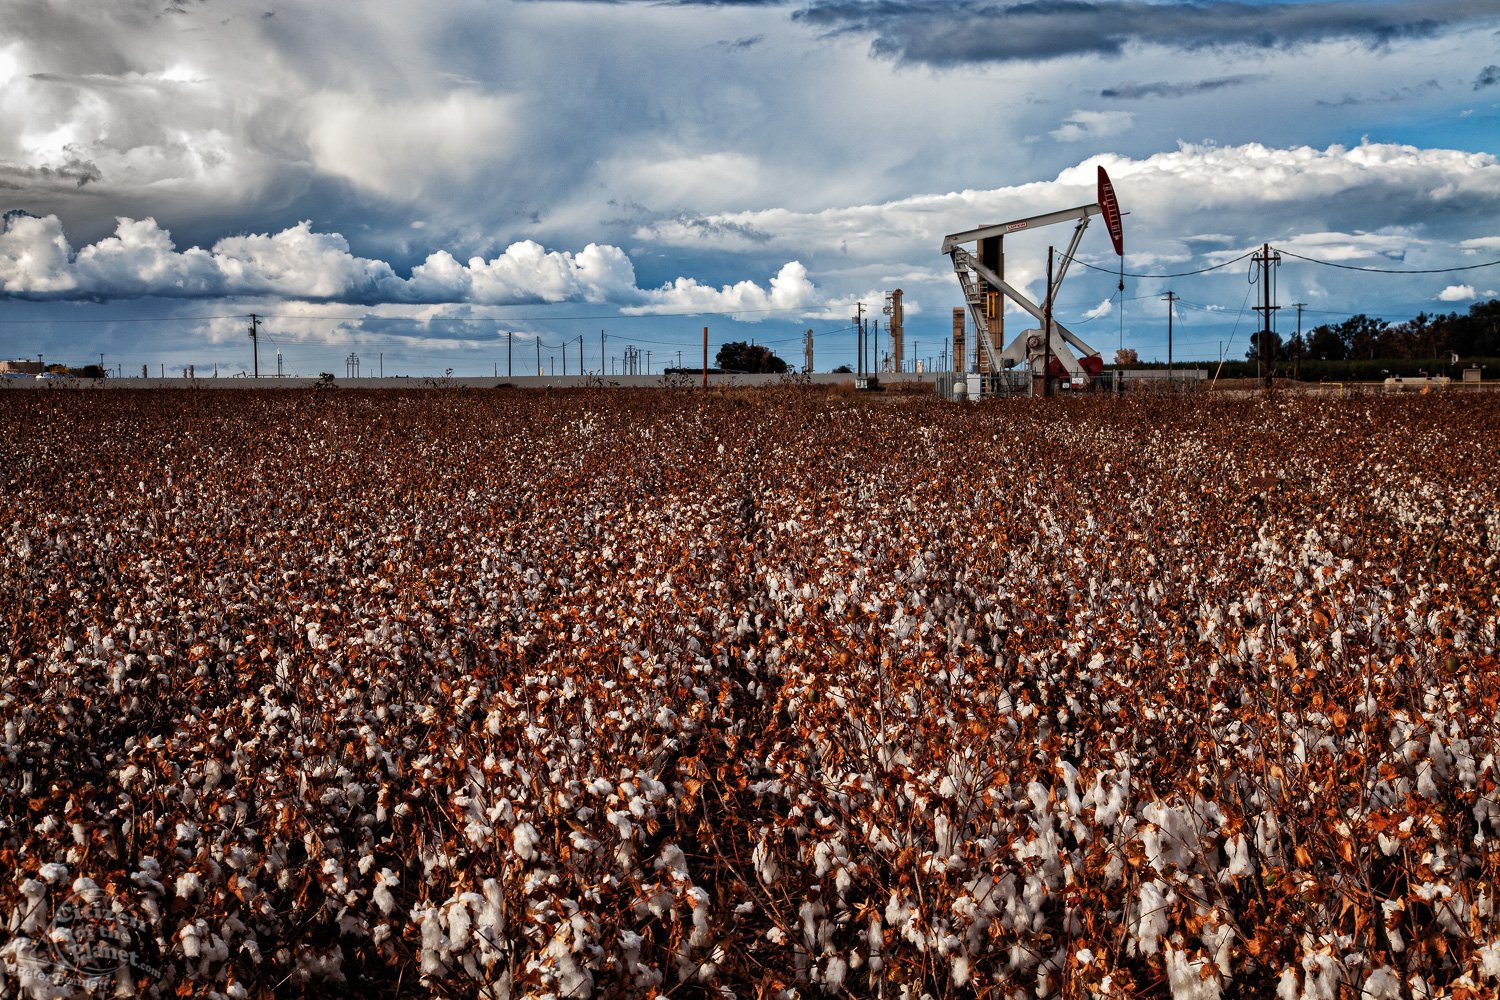  Pumpjack and fracking site in cotton field, Kern County. 